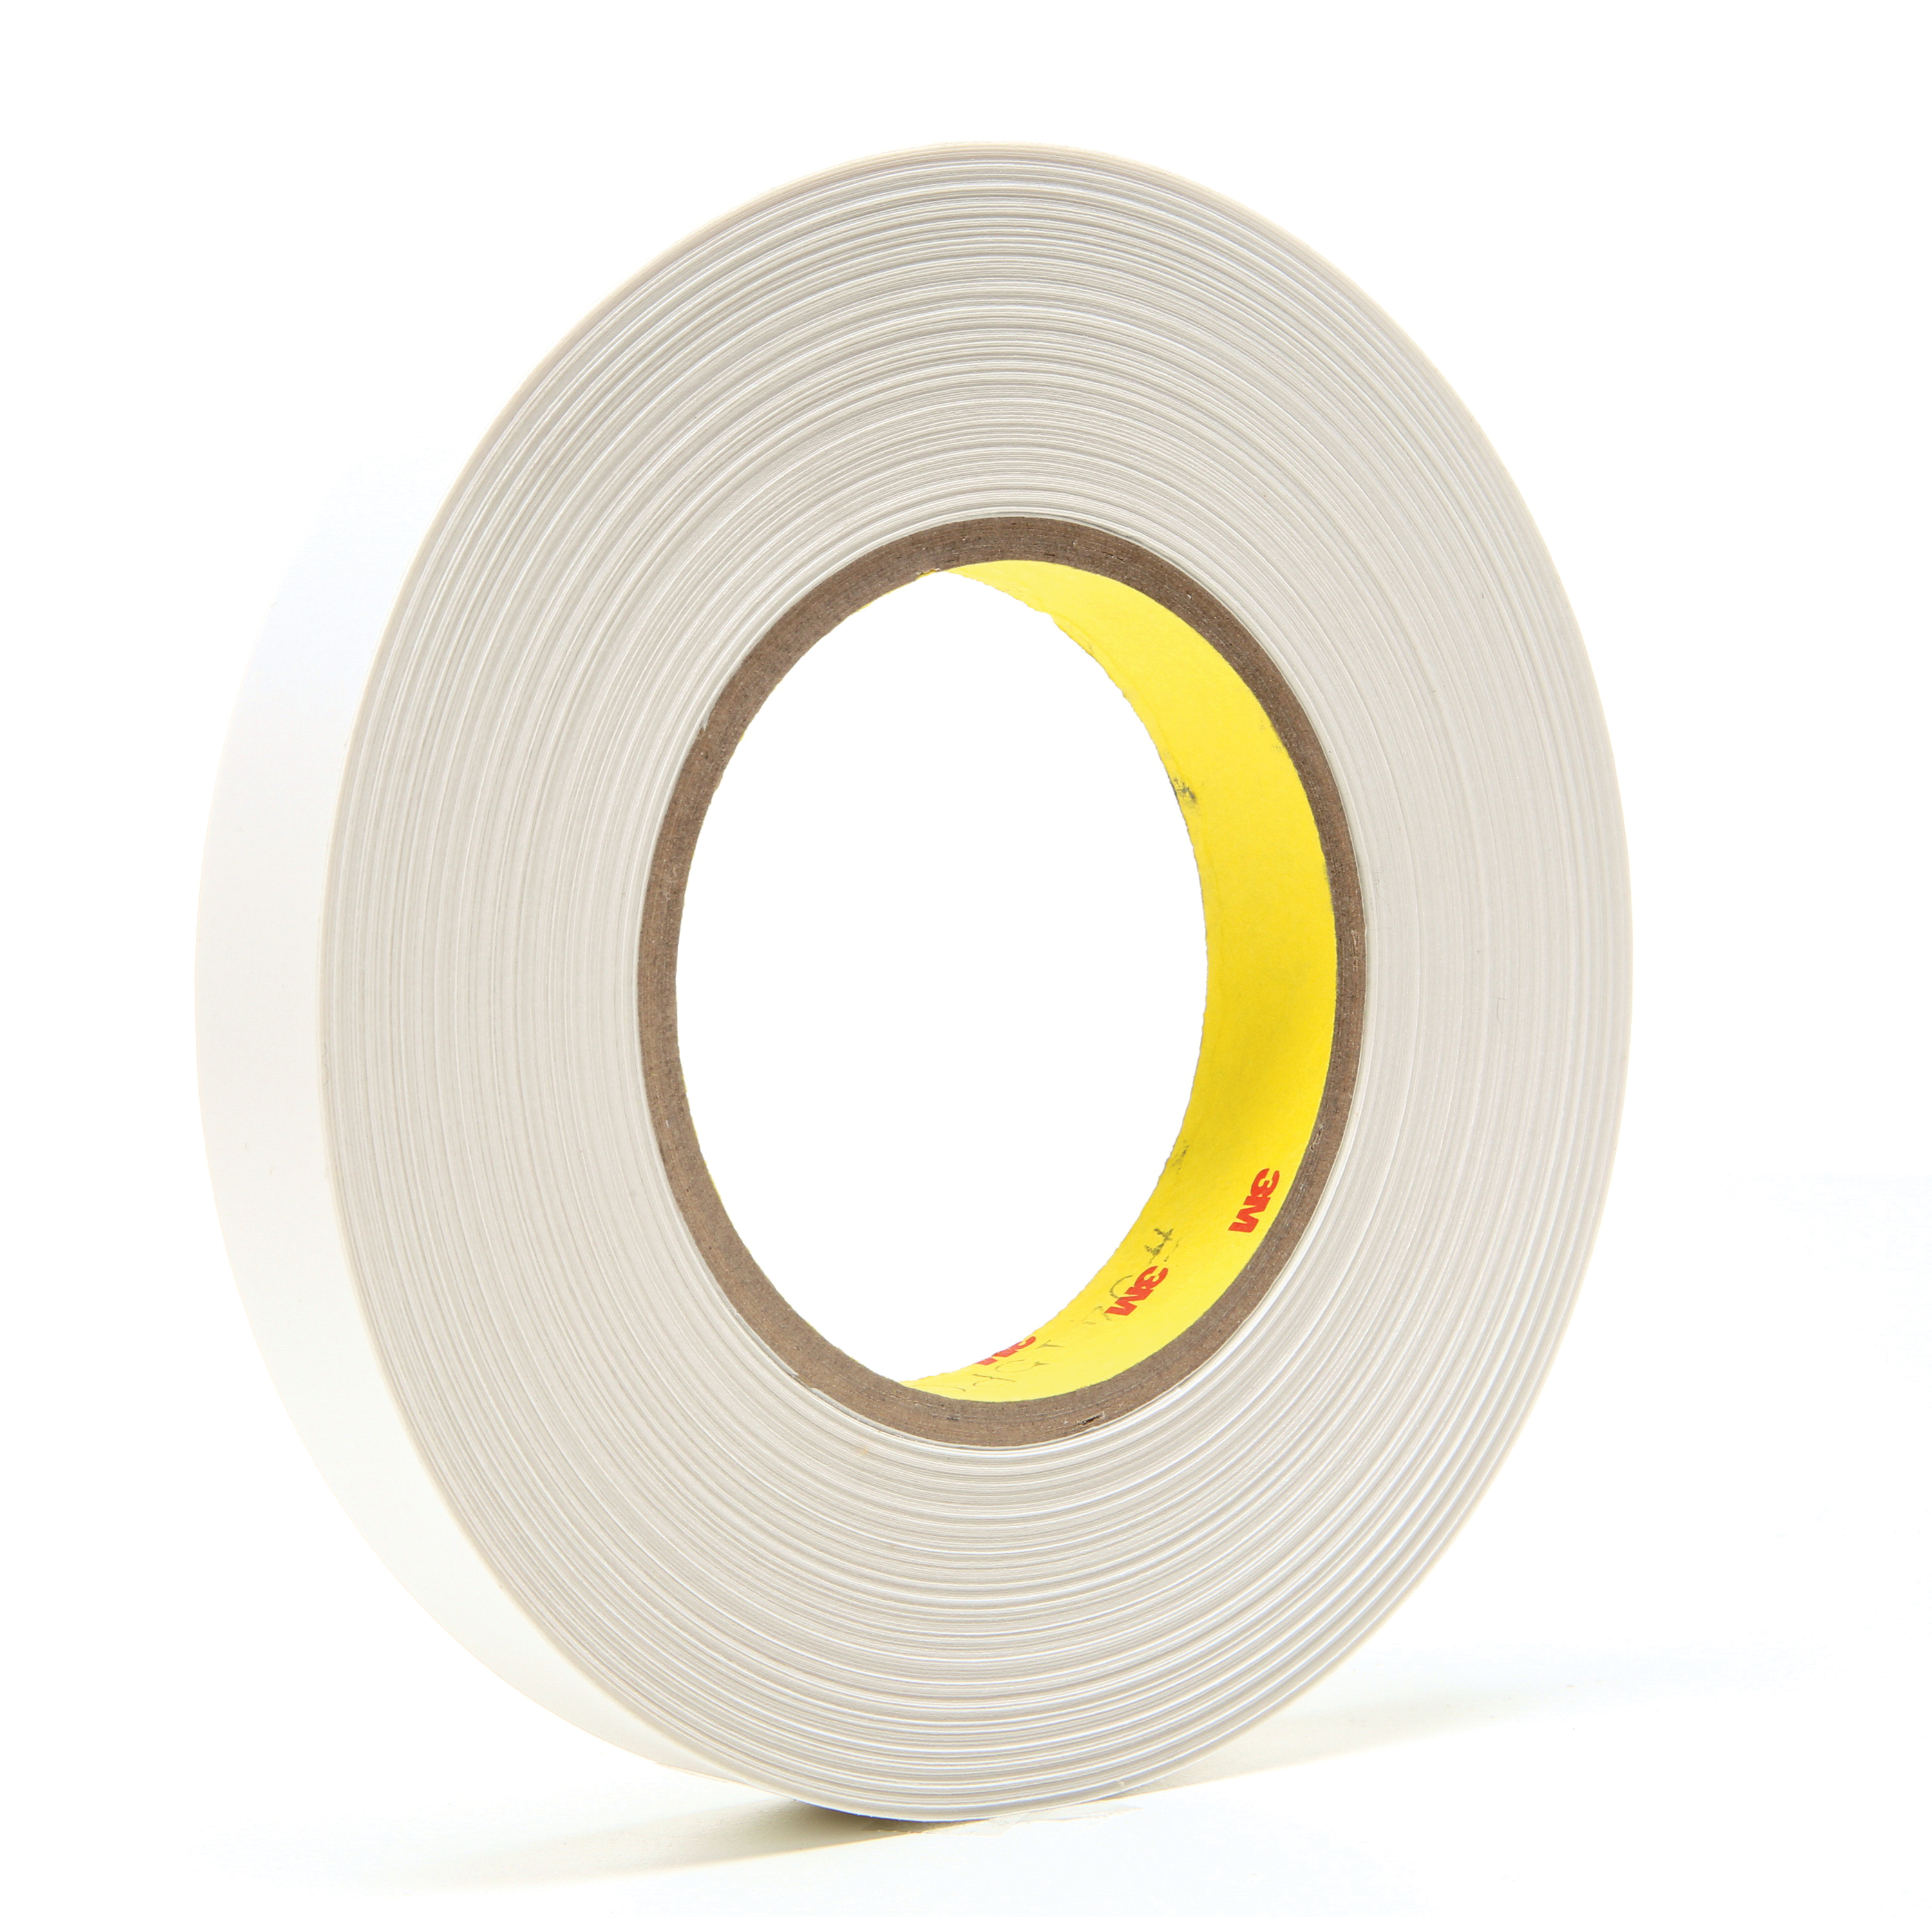 3M™ 021200-14537 Removable Repositionable Tape, 72 yd L x 3/4 in W, 7.6 mil THK, 0.5 mil 400 Acrylic Adhesive, Polyester Film Backing, Clear